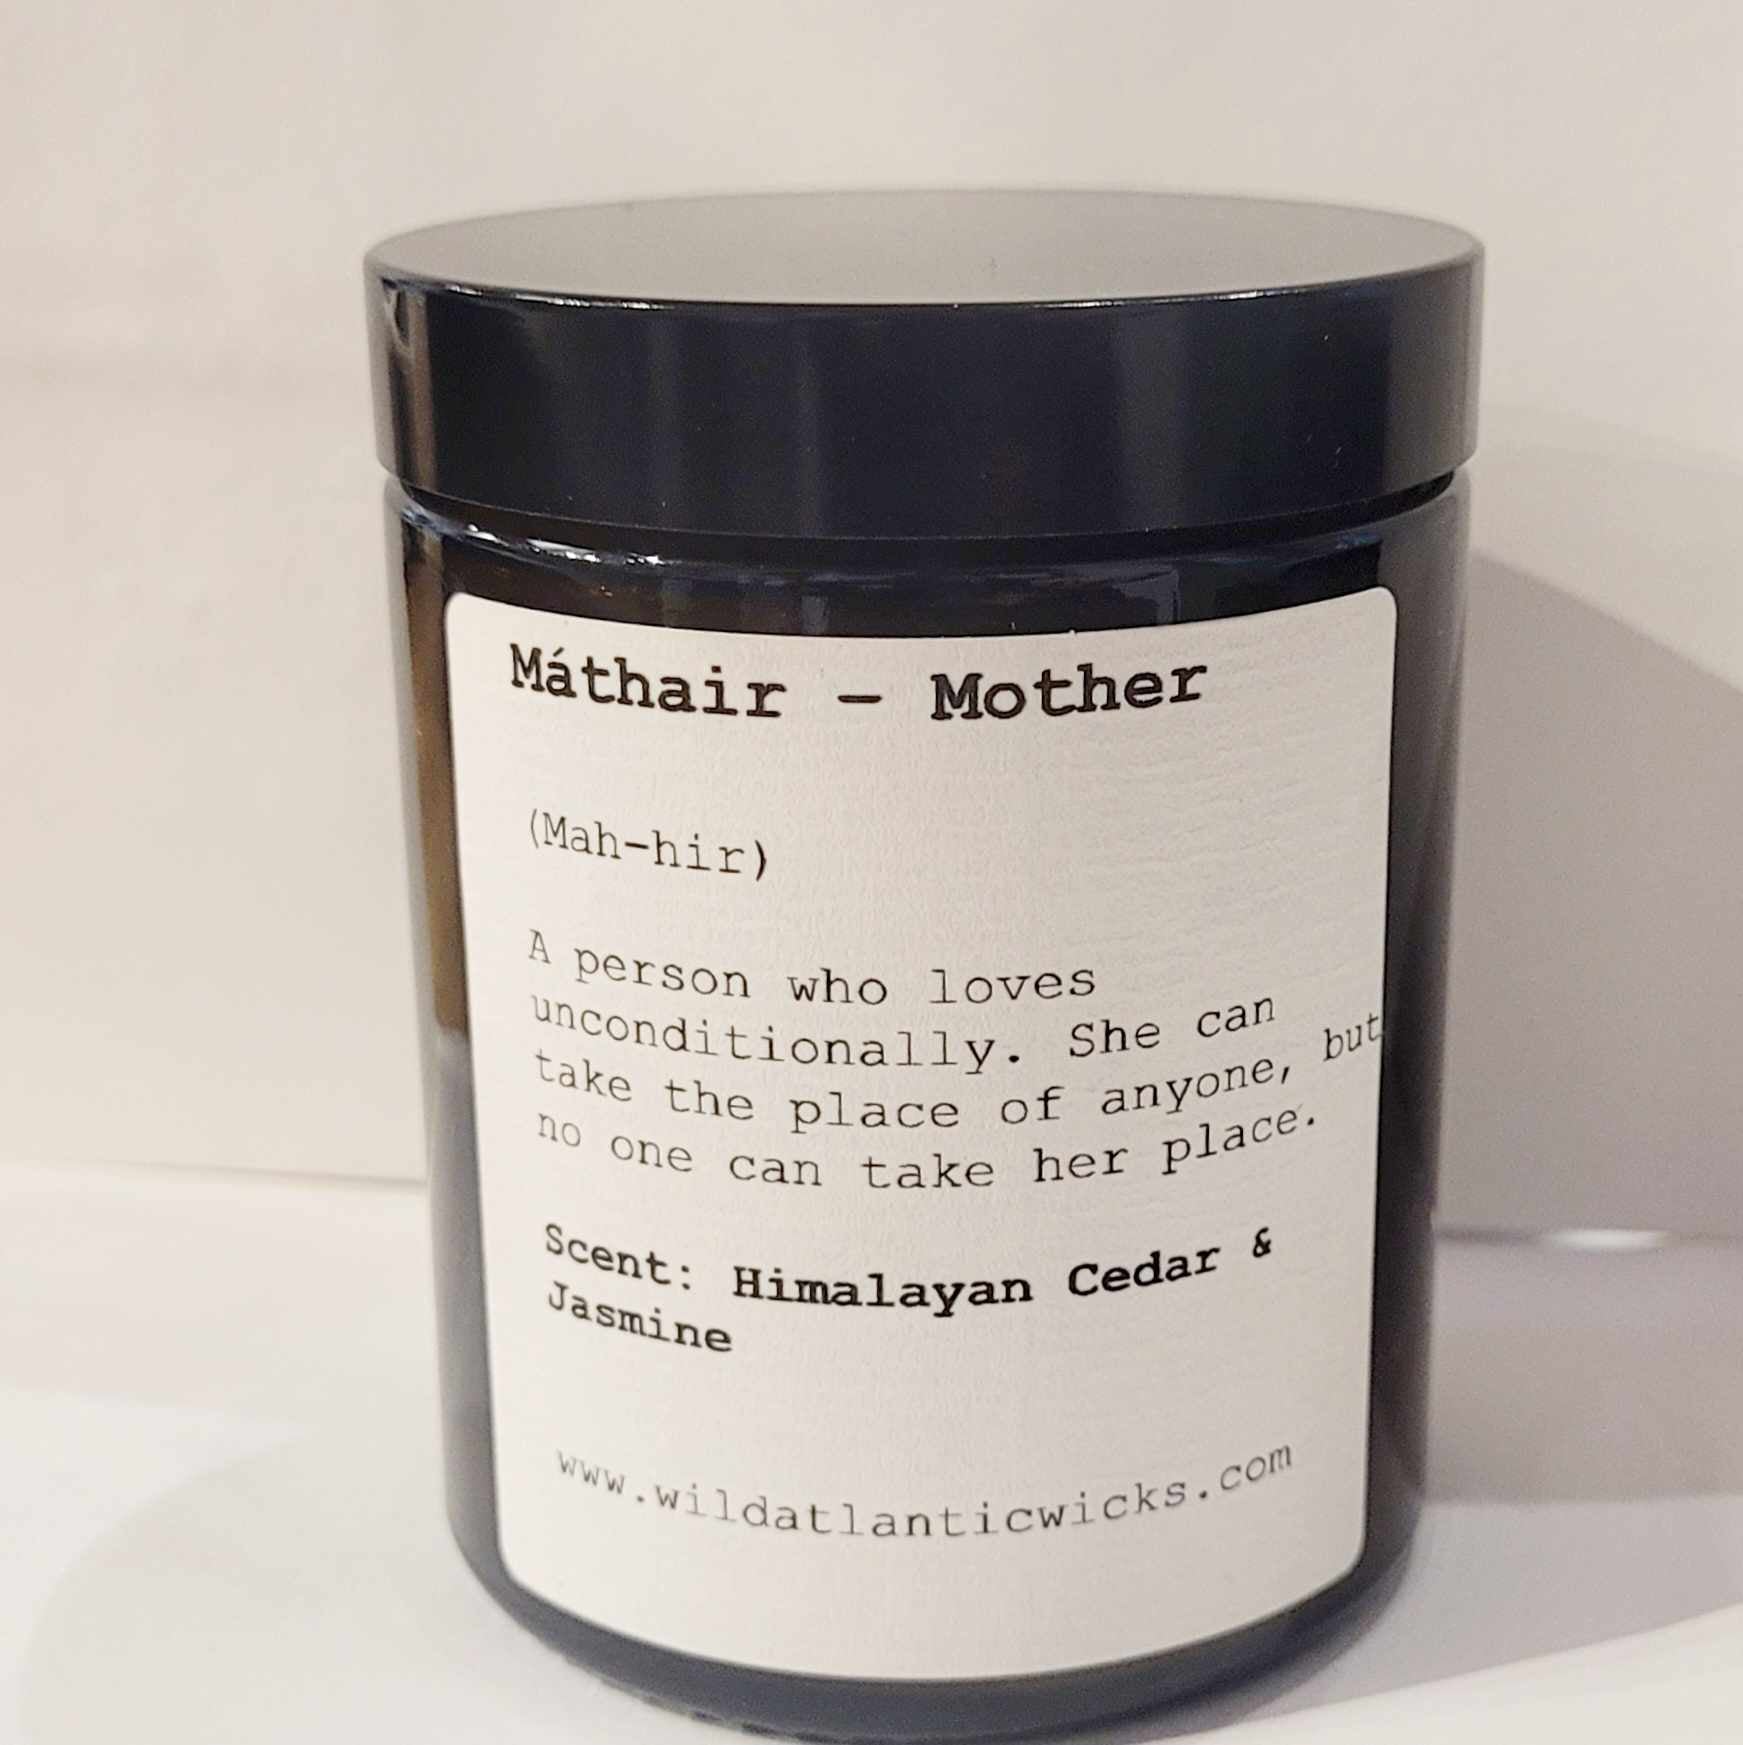 Máthair - Mother Candle by Wild Atlantic Wicks